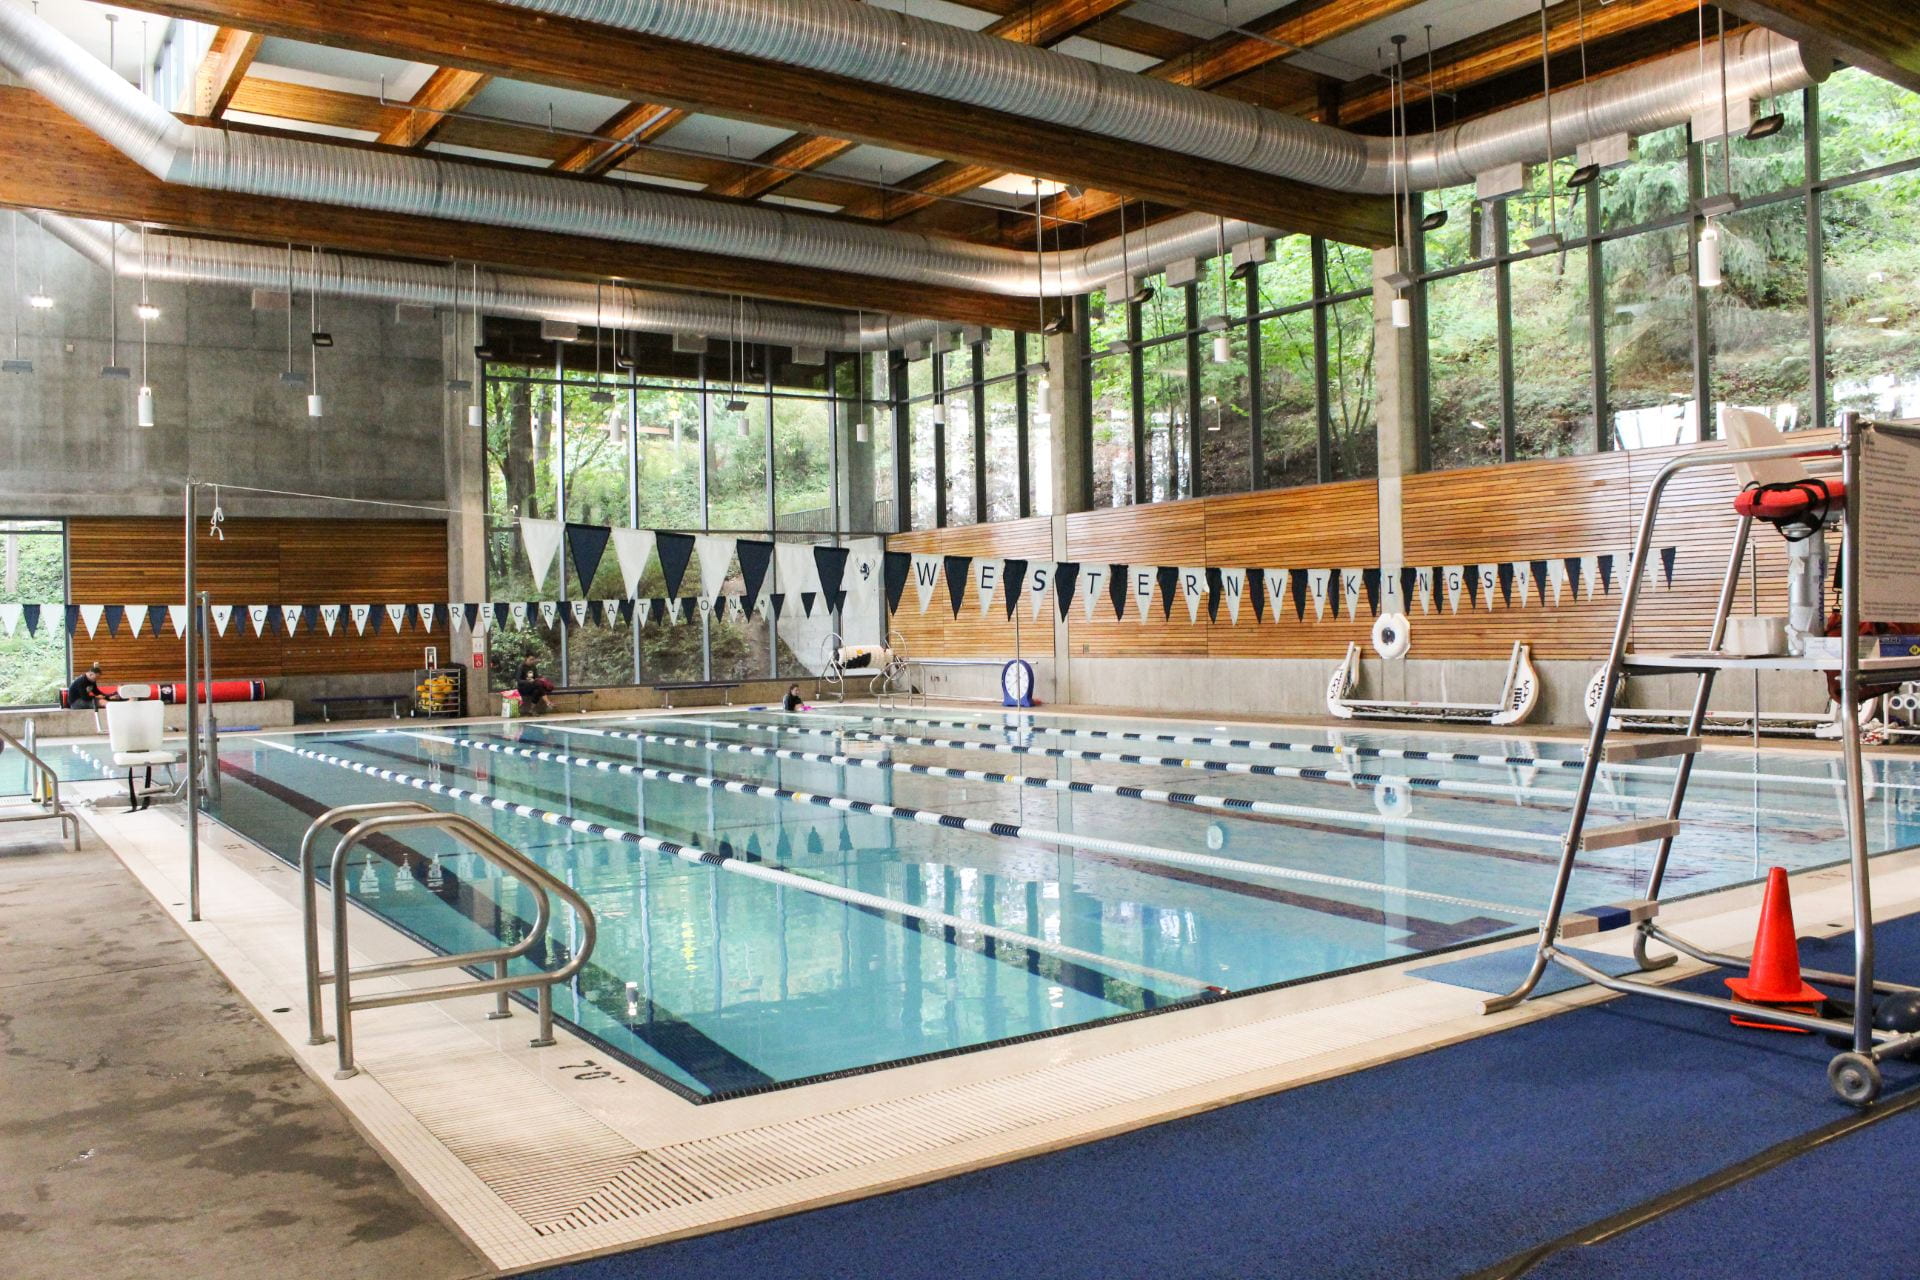 WWU Rec Center indoor swimming pool in a naturally lit room with a bank of windows high up on one wall. A white and blue triangle flag banner hangs above the pool lanes.